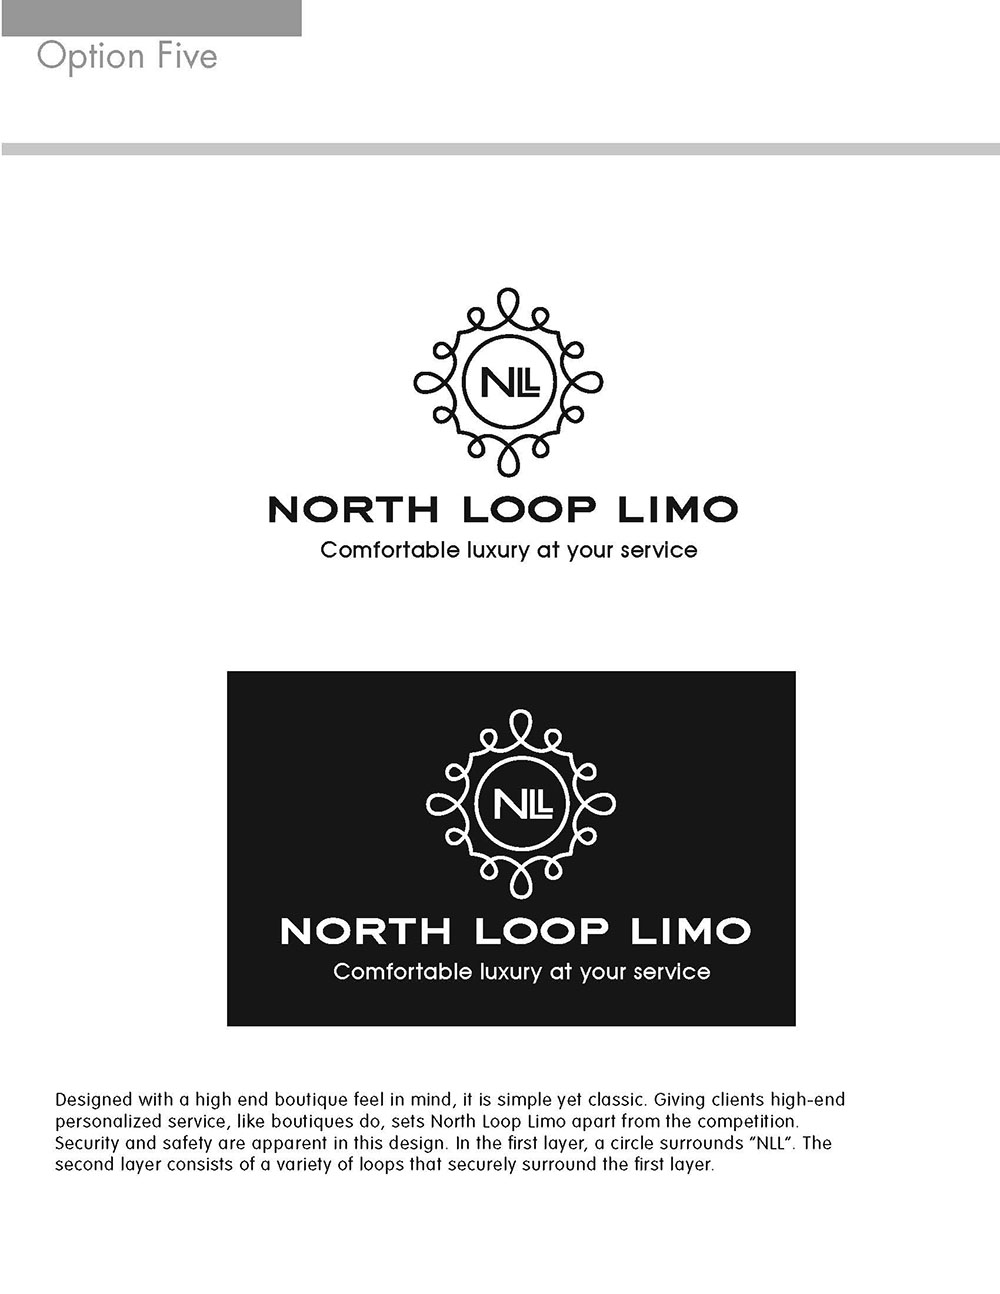 North Loop Limo Black and White Logo Concept